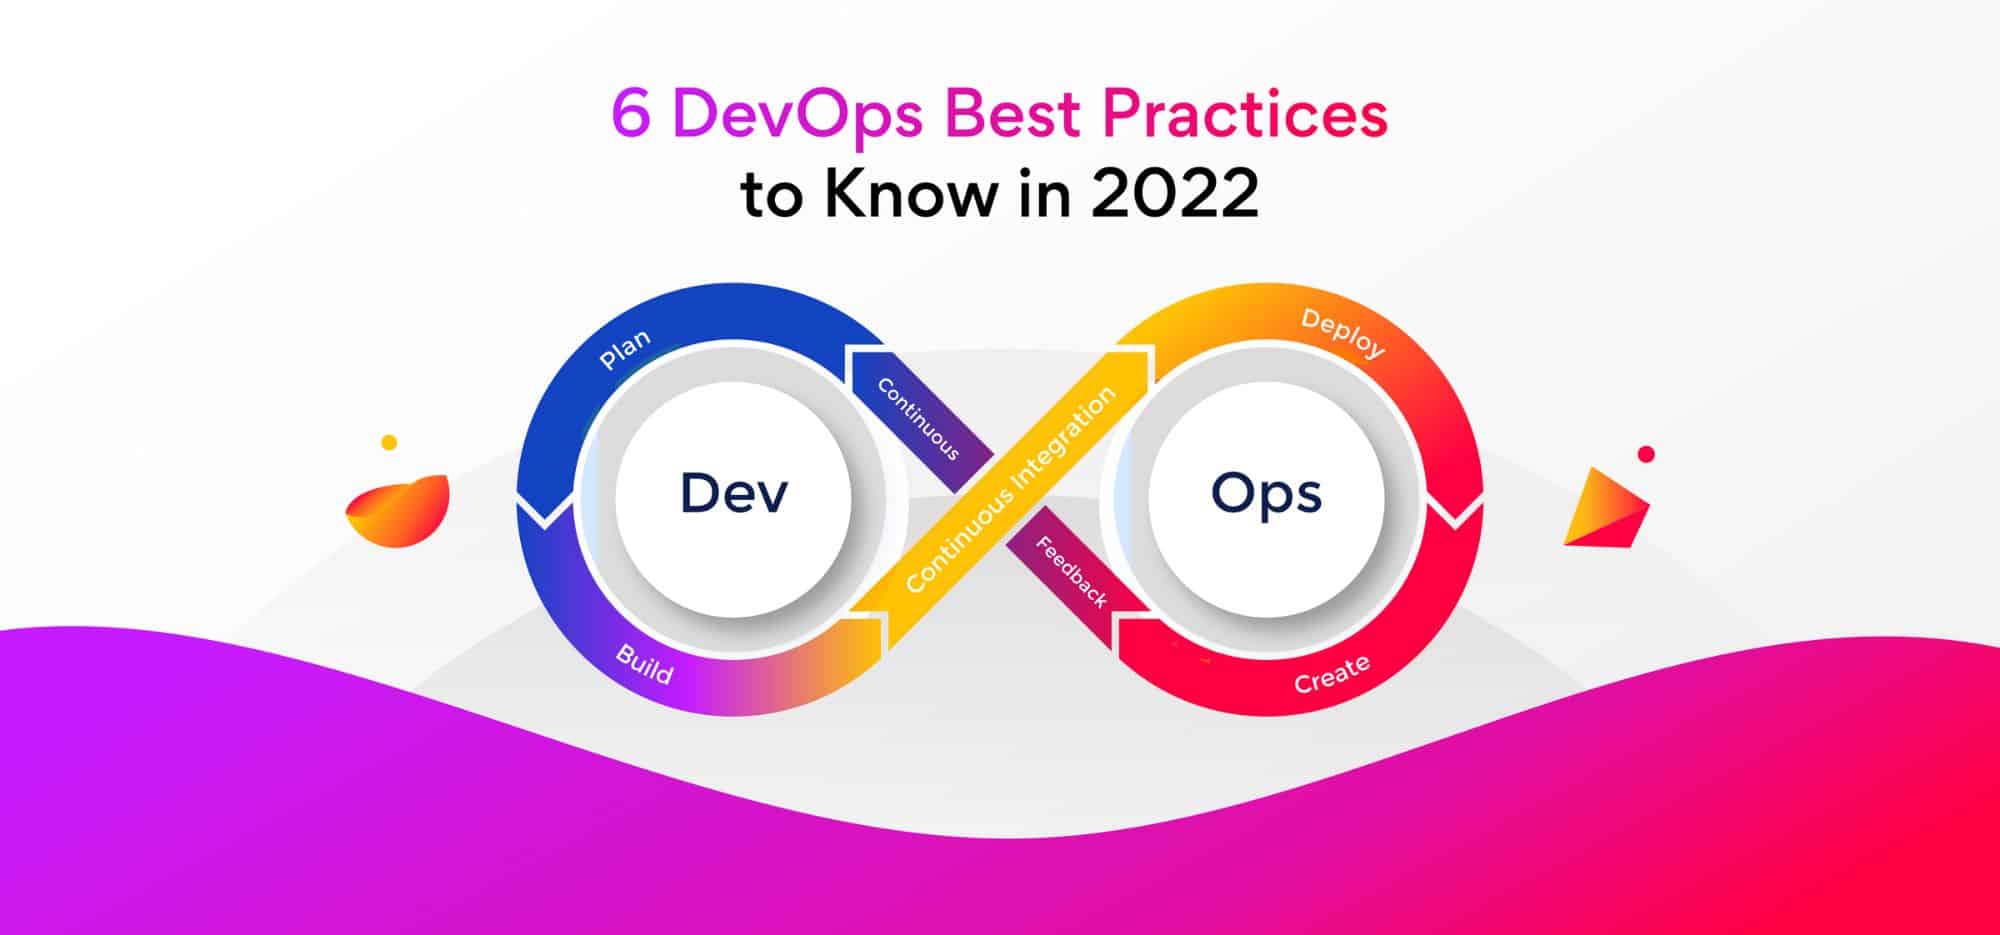 6 DevOps best practices to know in 2022